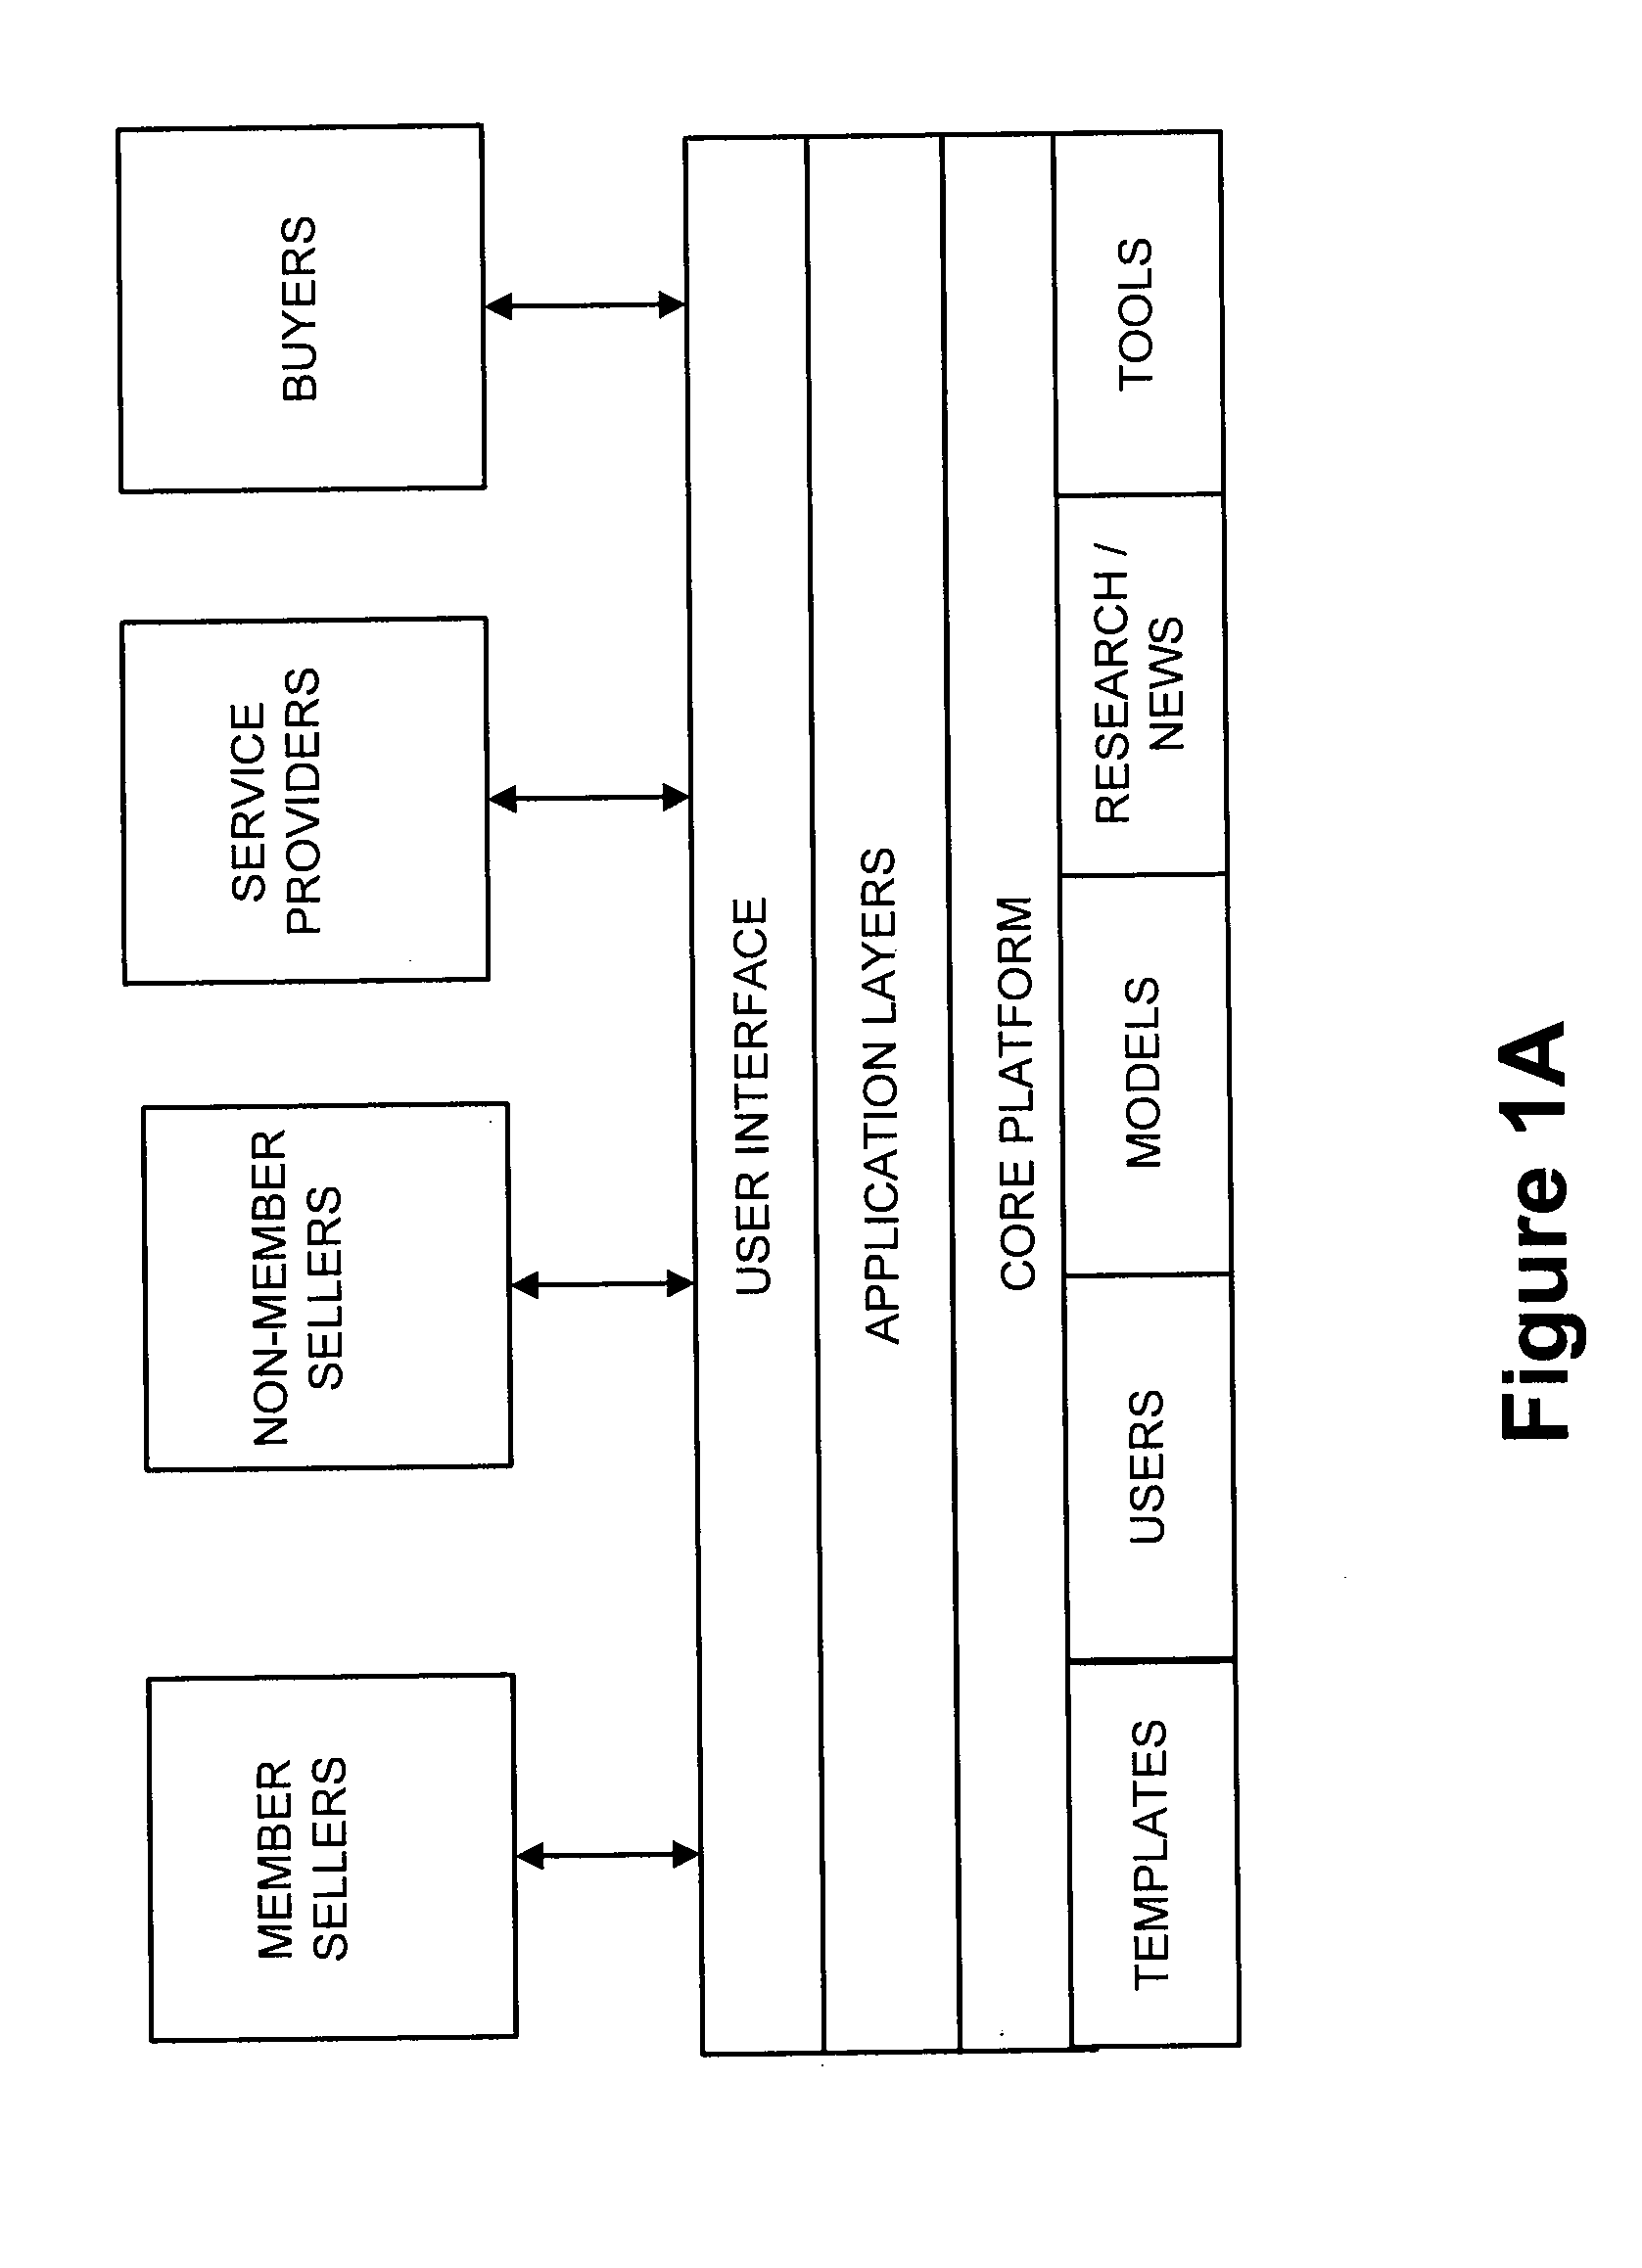 System and method for adjusting intake based on intellectual property asset data